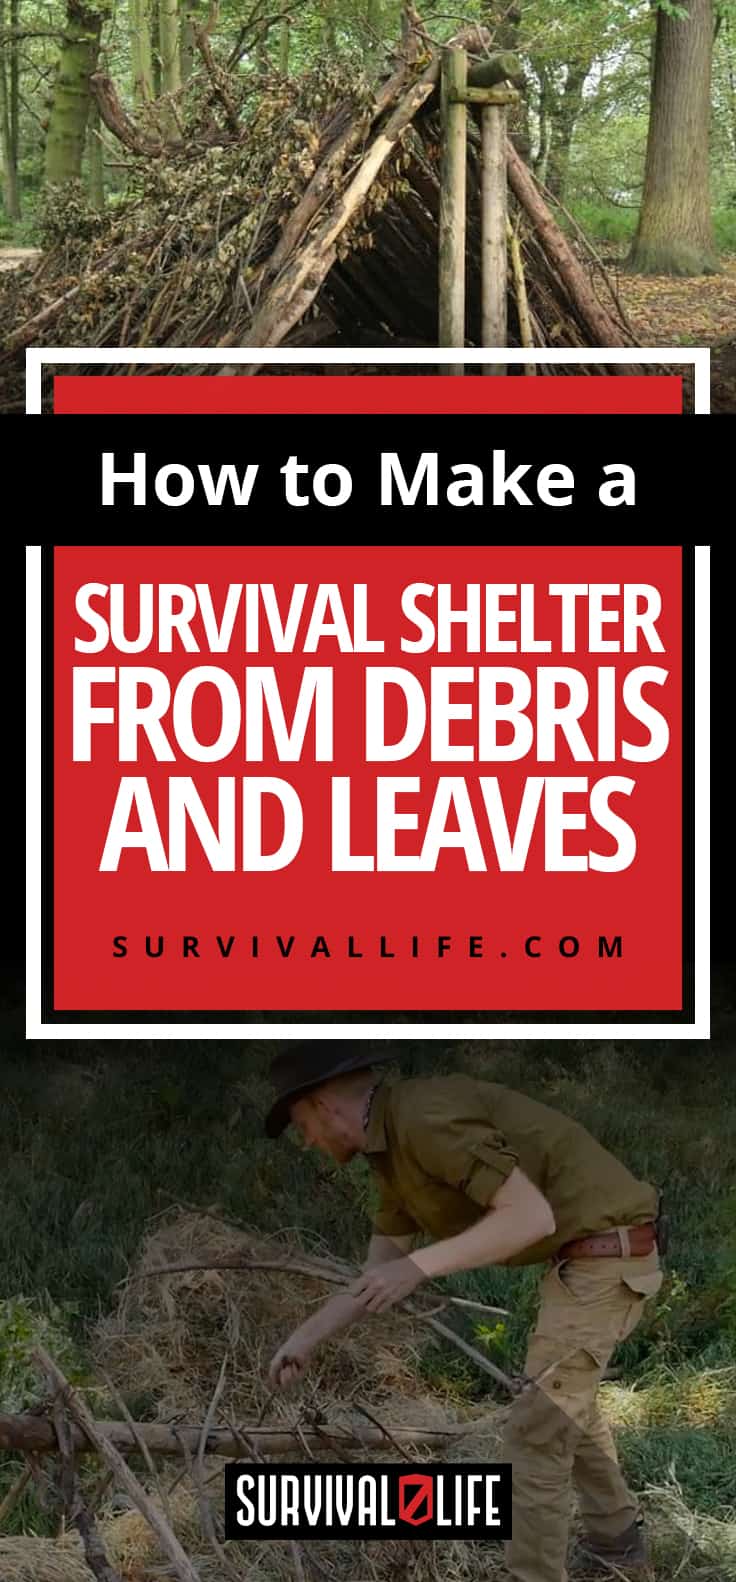 How to Make a Survival Shelter From Debris and Leaves